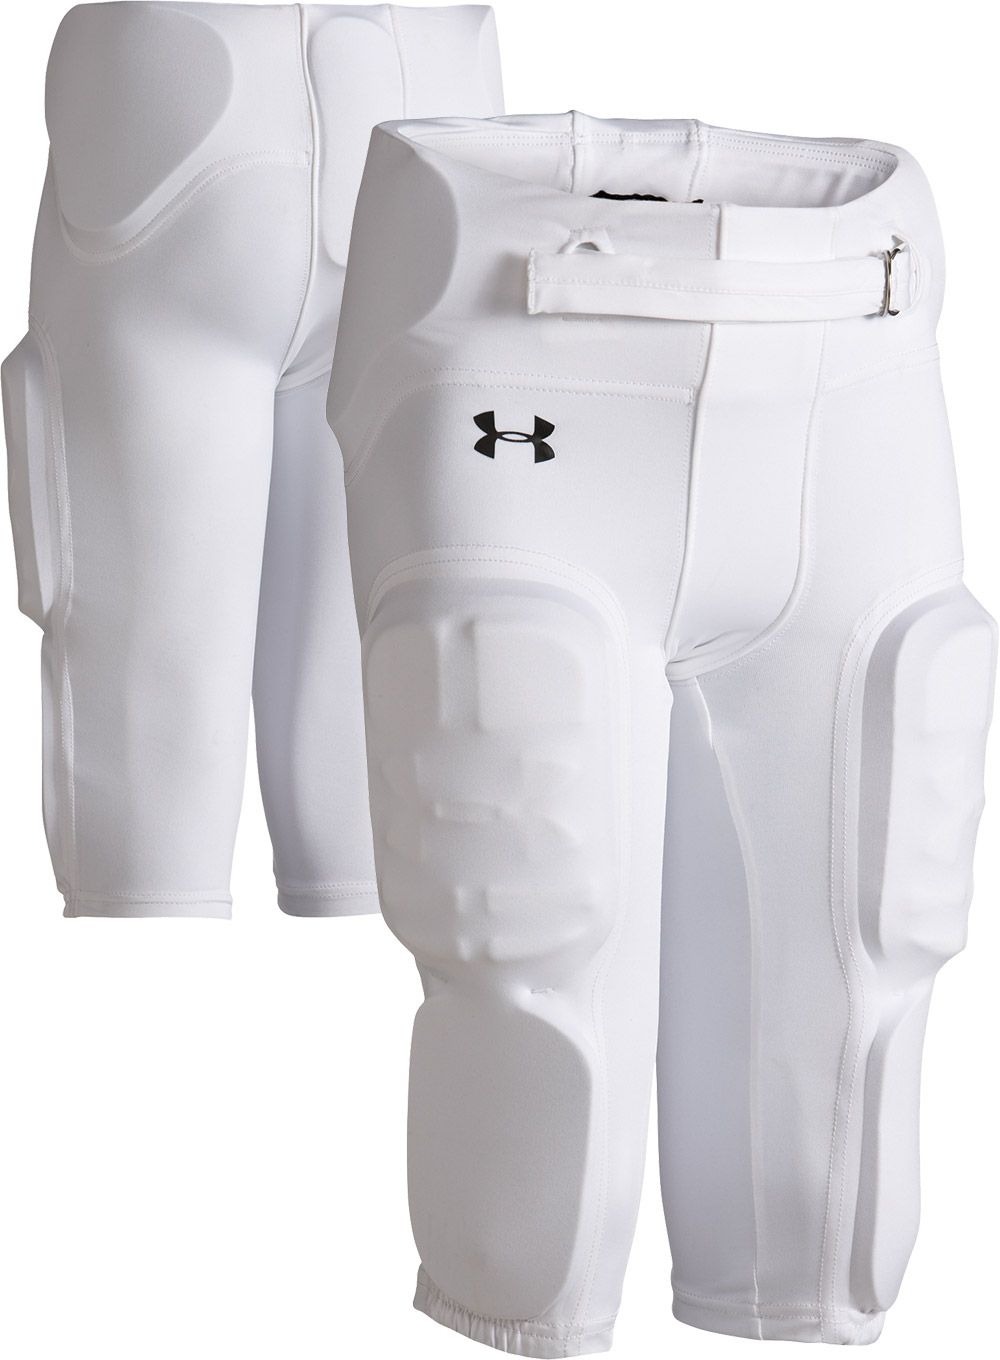 Under Armour Integrated Football Pants White Youth Small for sale online 